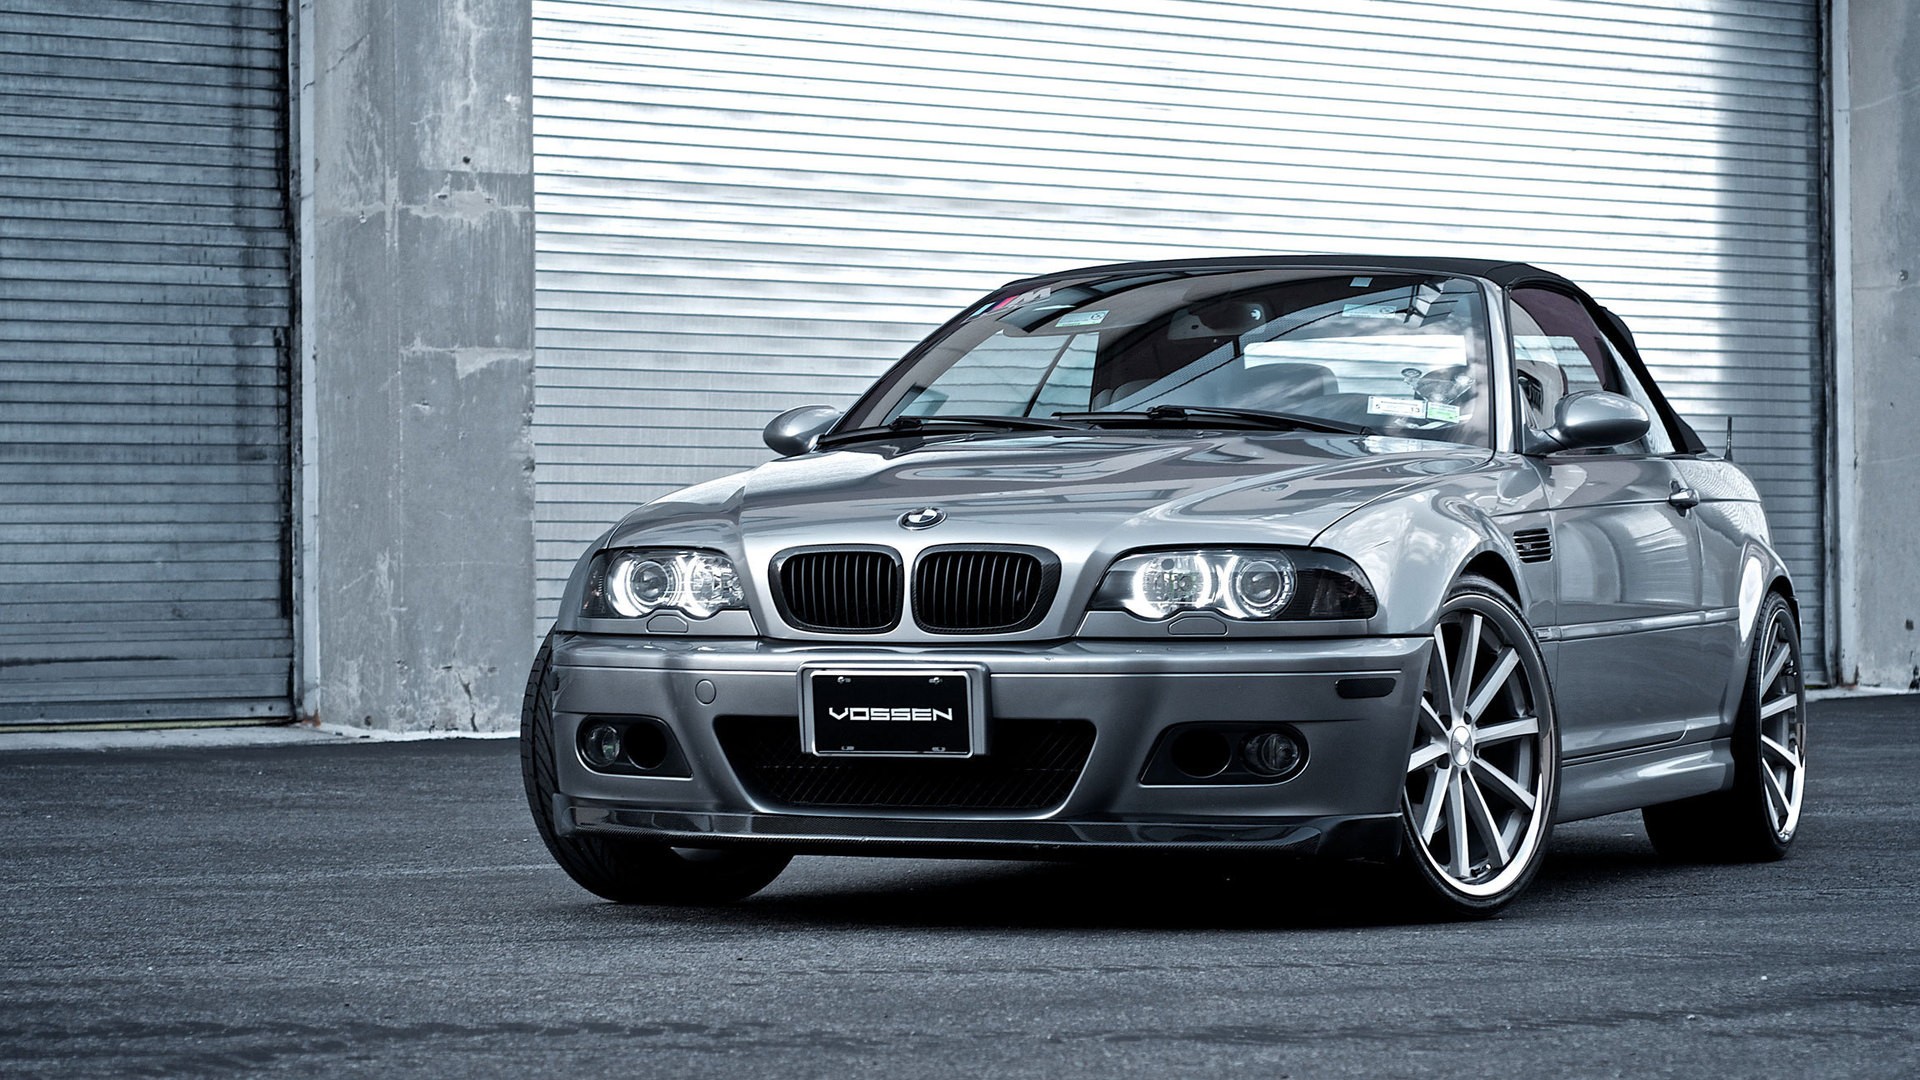 bmw, Cars, Engines, Front, Silver, Vehicles, Supercars, Tuning, Convertible, Wheels, Bmw, M3, Sports, Cars, Bmw, E46, Luxury, Sport, Cars, Cabrio, Speed, Automobiles Wallpaper